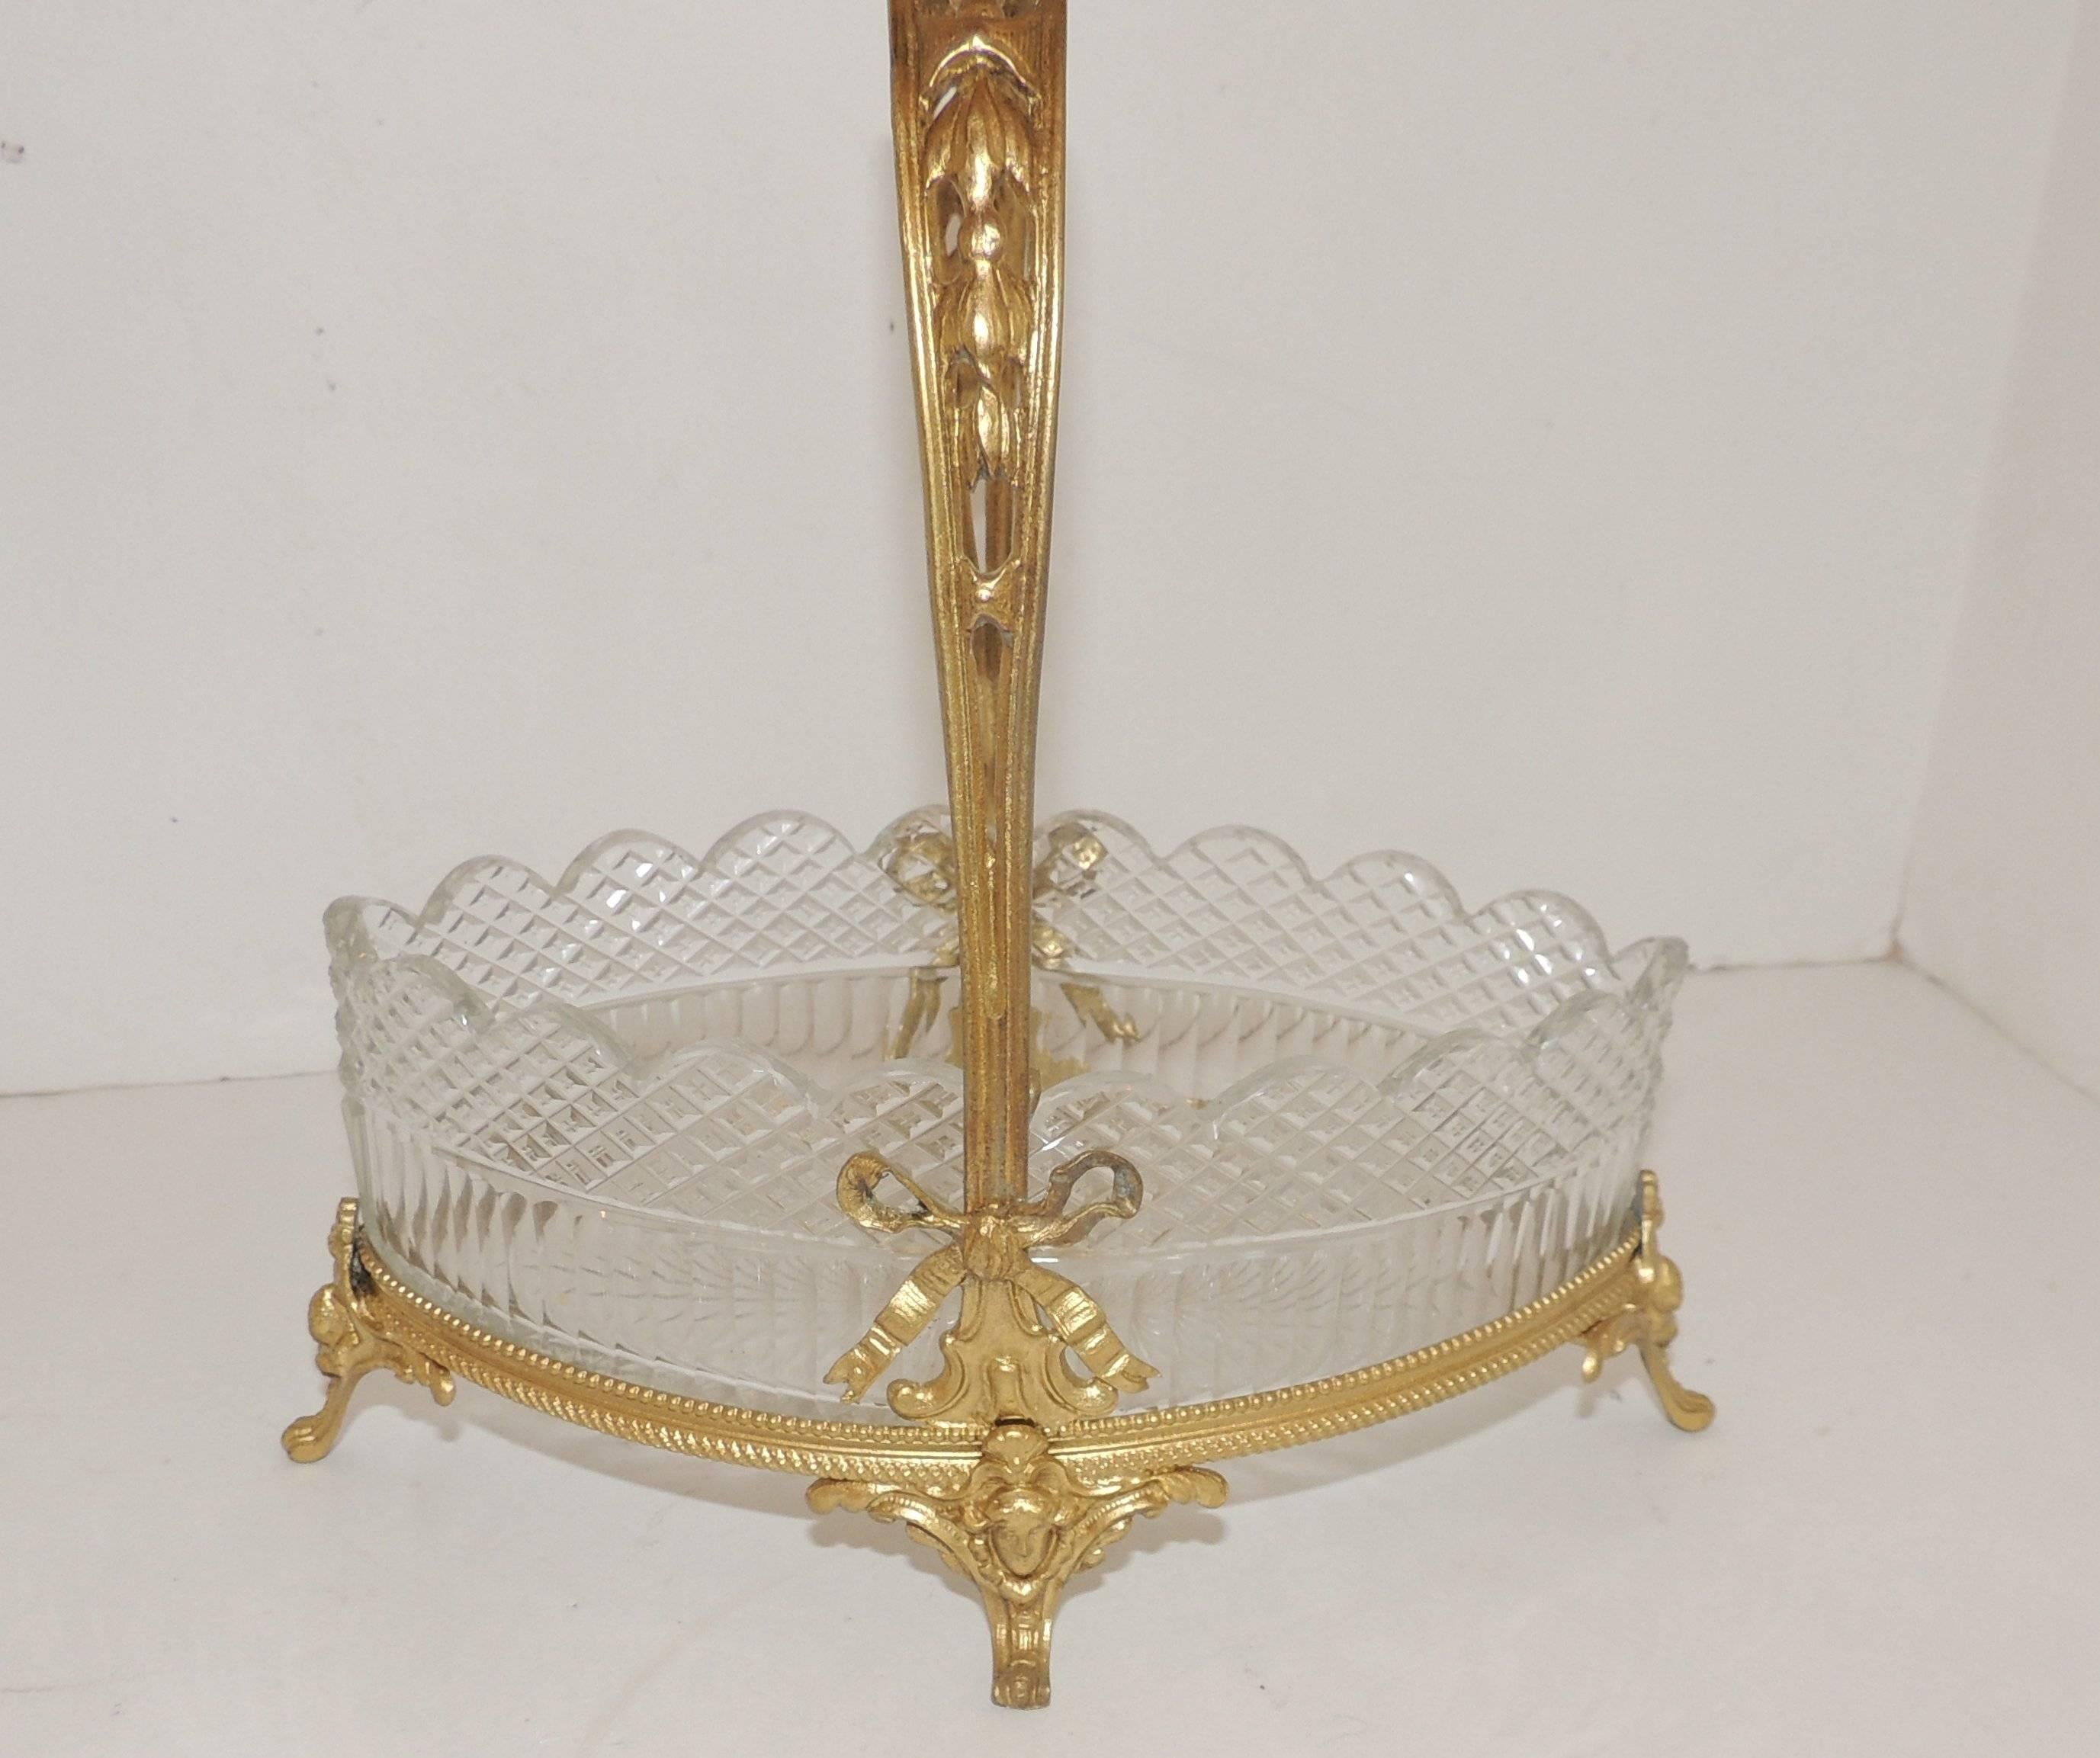 Wonderful French Scalloped Crystal Centerpiece Gilt Bronze Footed Bow Basket For Sale 2